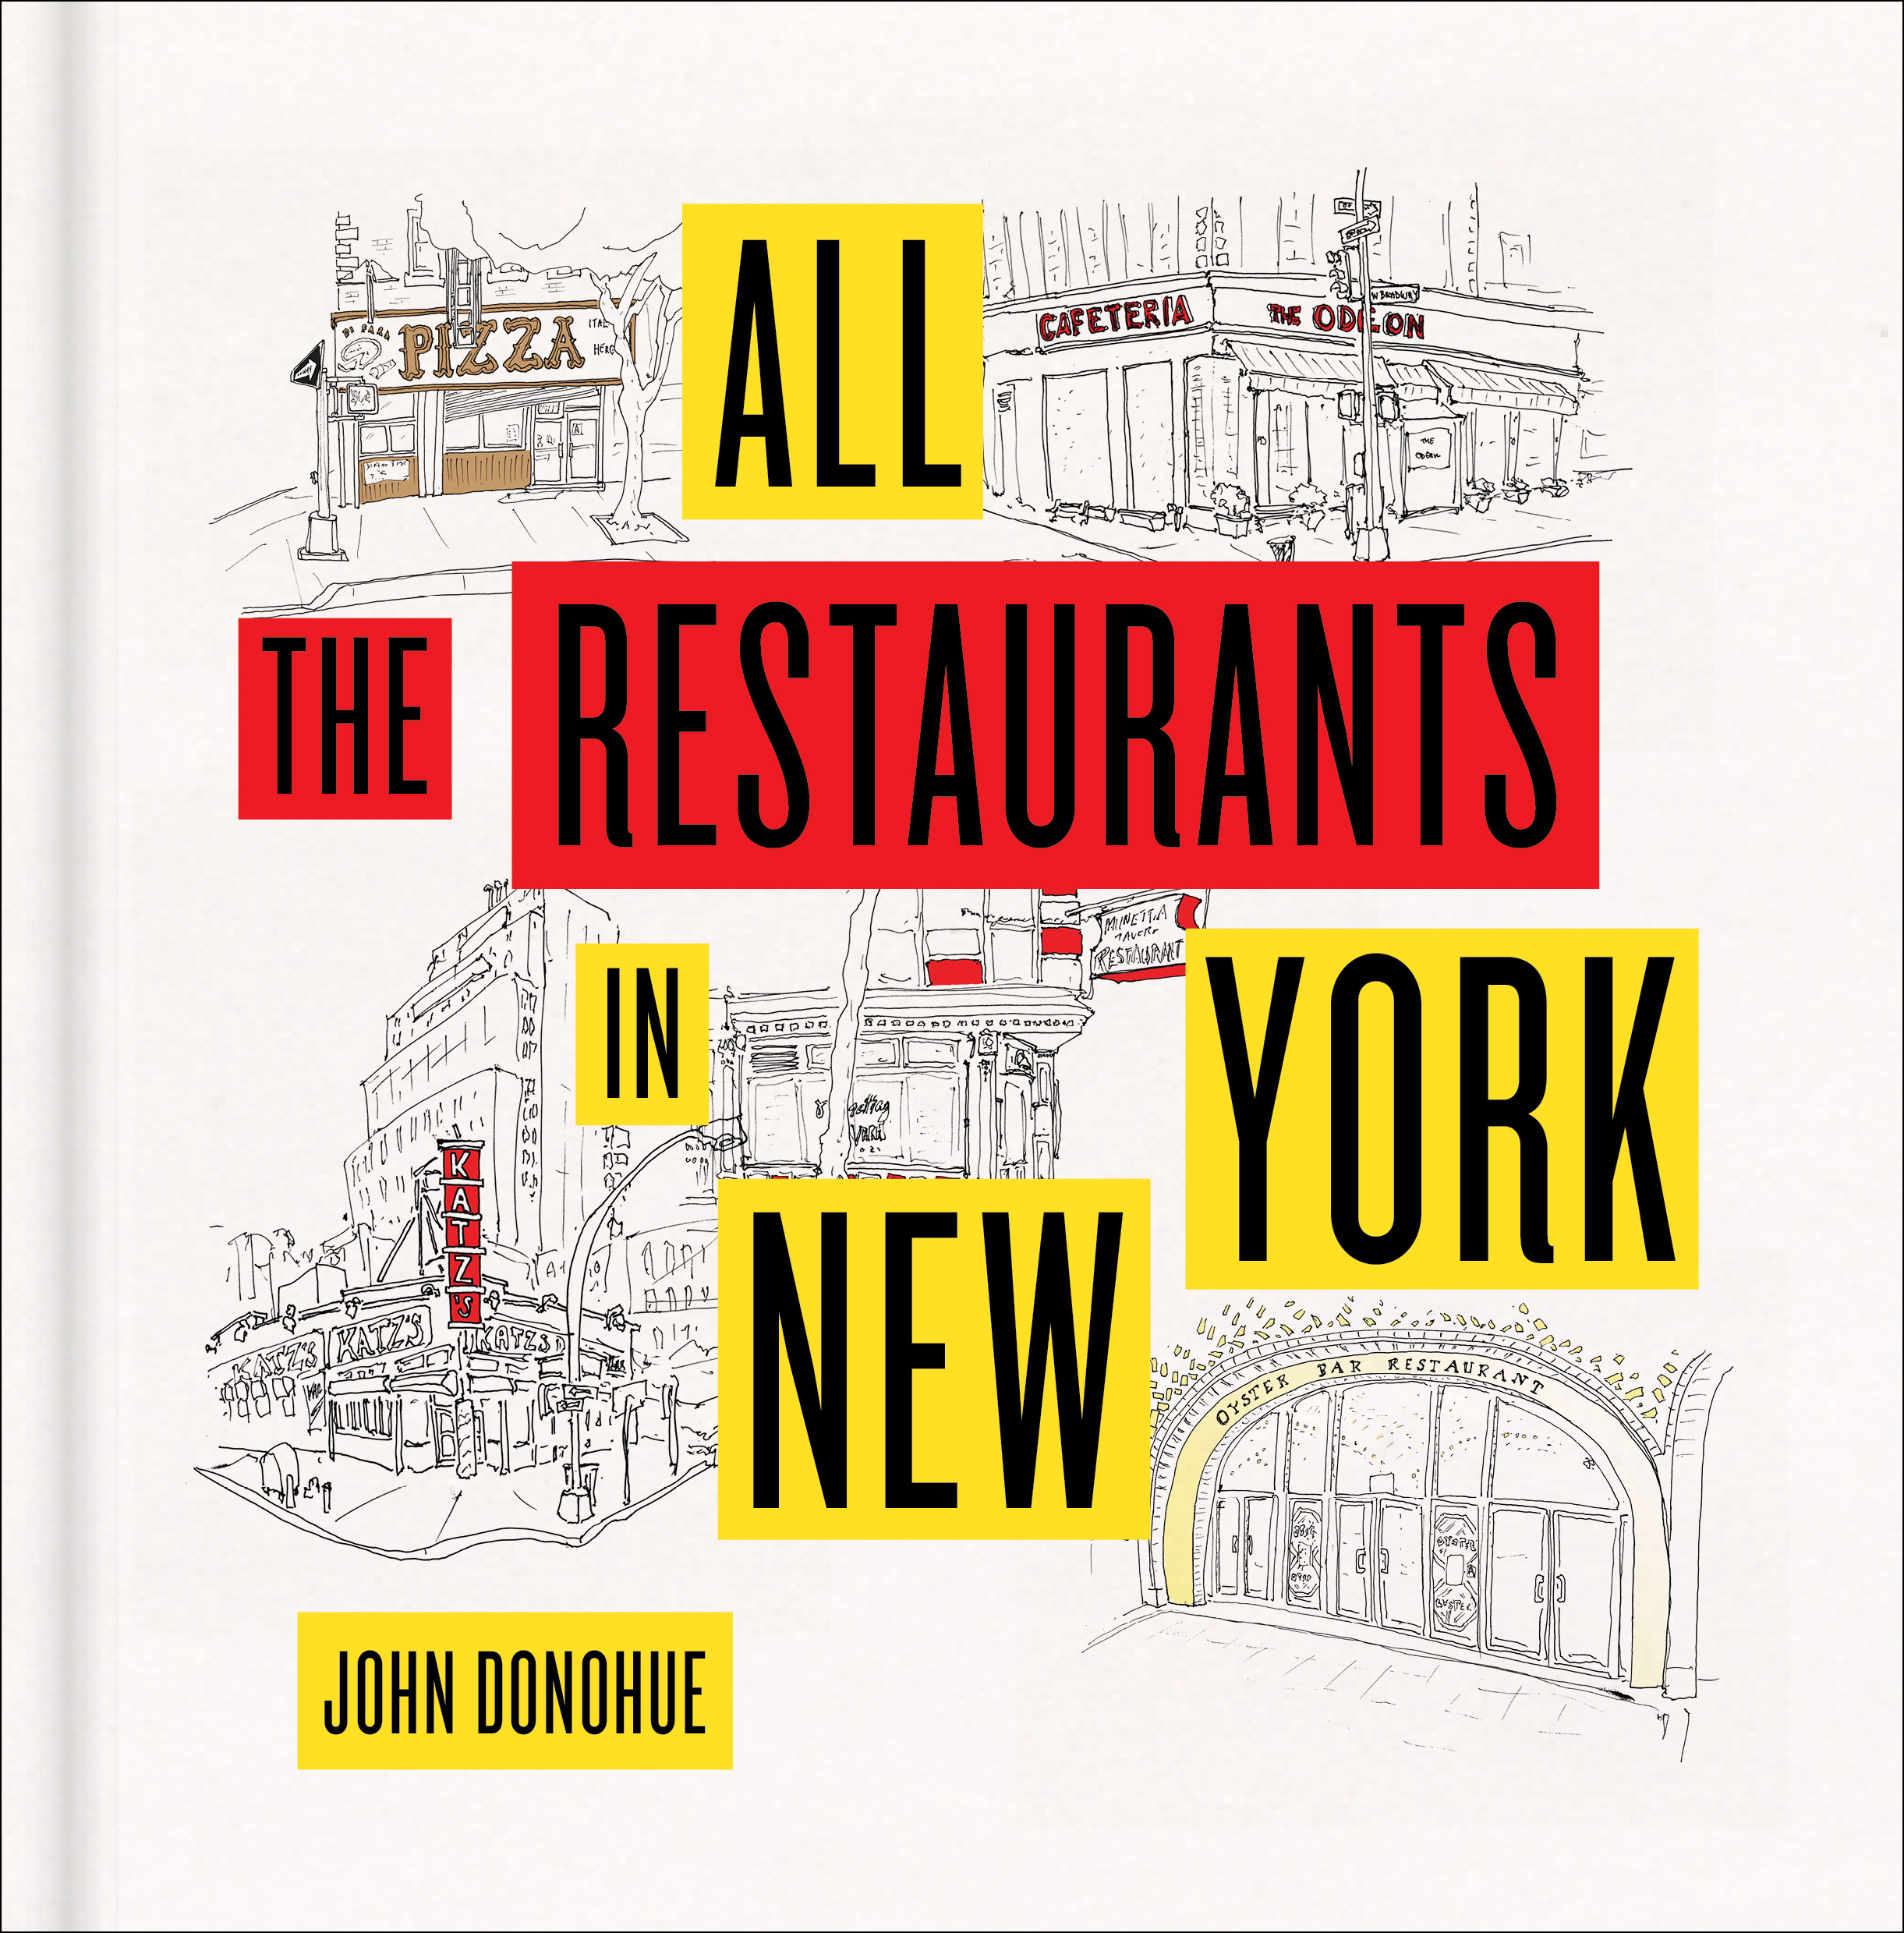 Book Launch: All the Restaurants in New York by John Donohue in conversation with Amanda Kludt